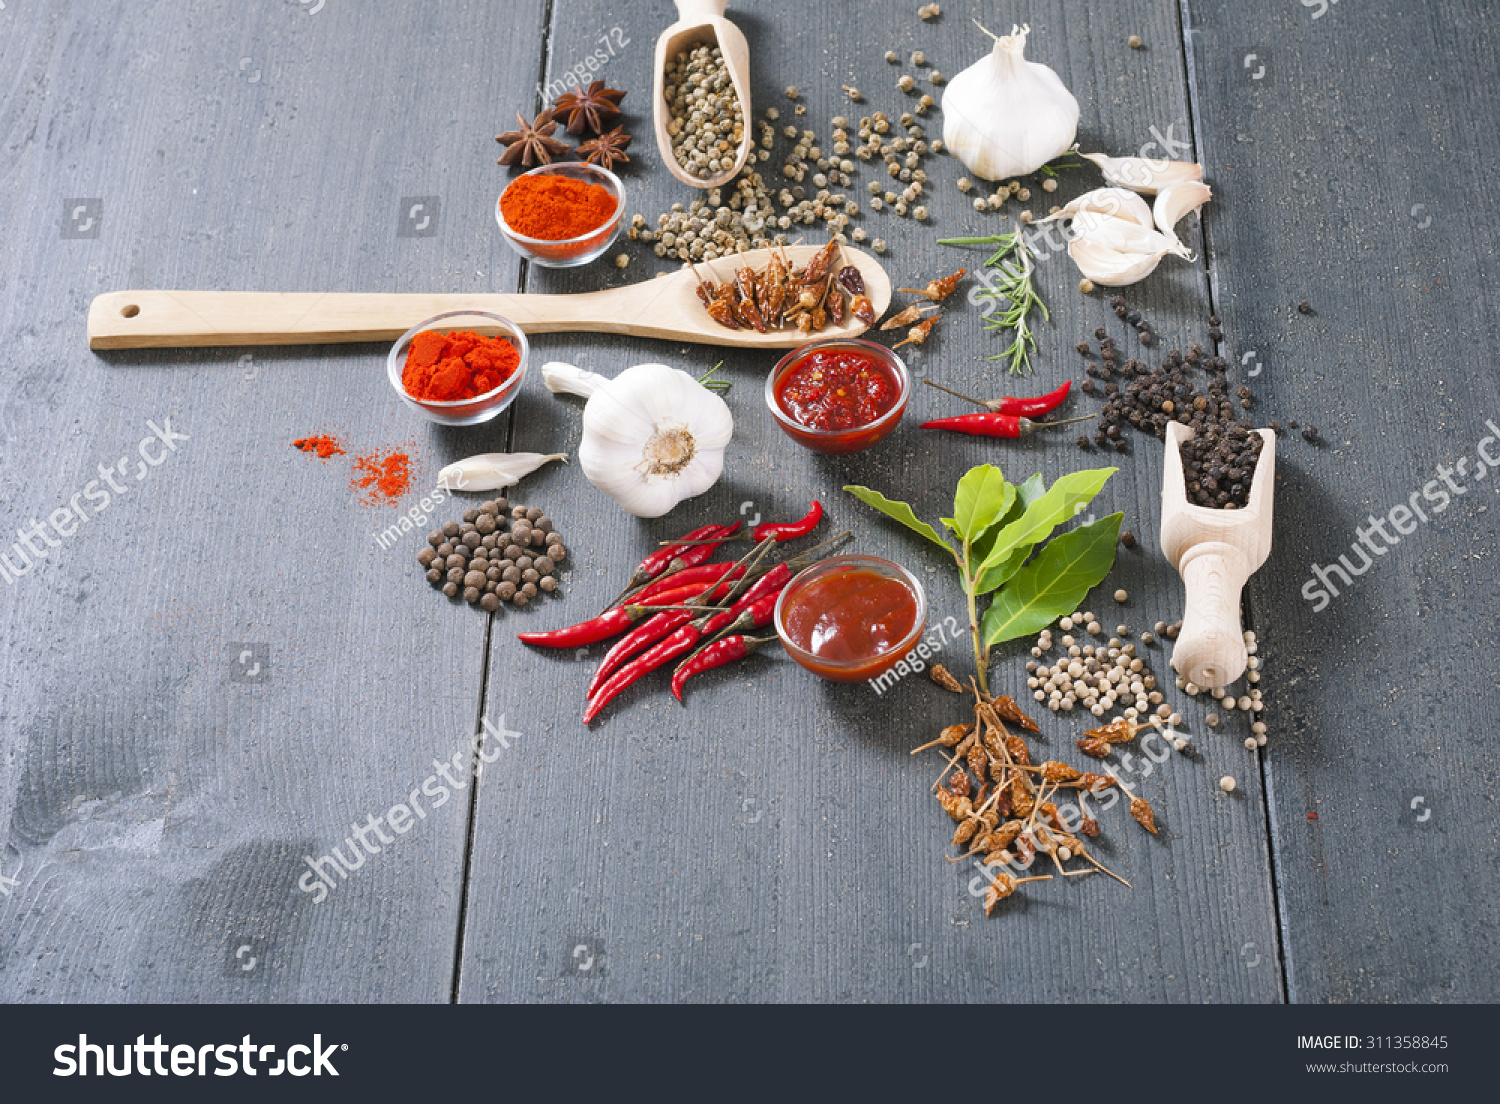 fresh and dried chili fruits, peppercorn, pepper powder, sauce and garlic, bay leaves on old black wooden table background #311358845